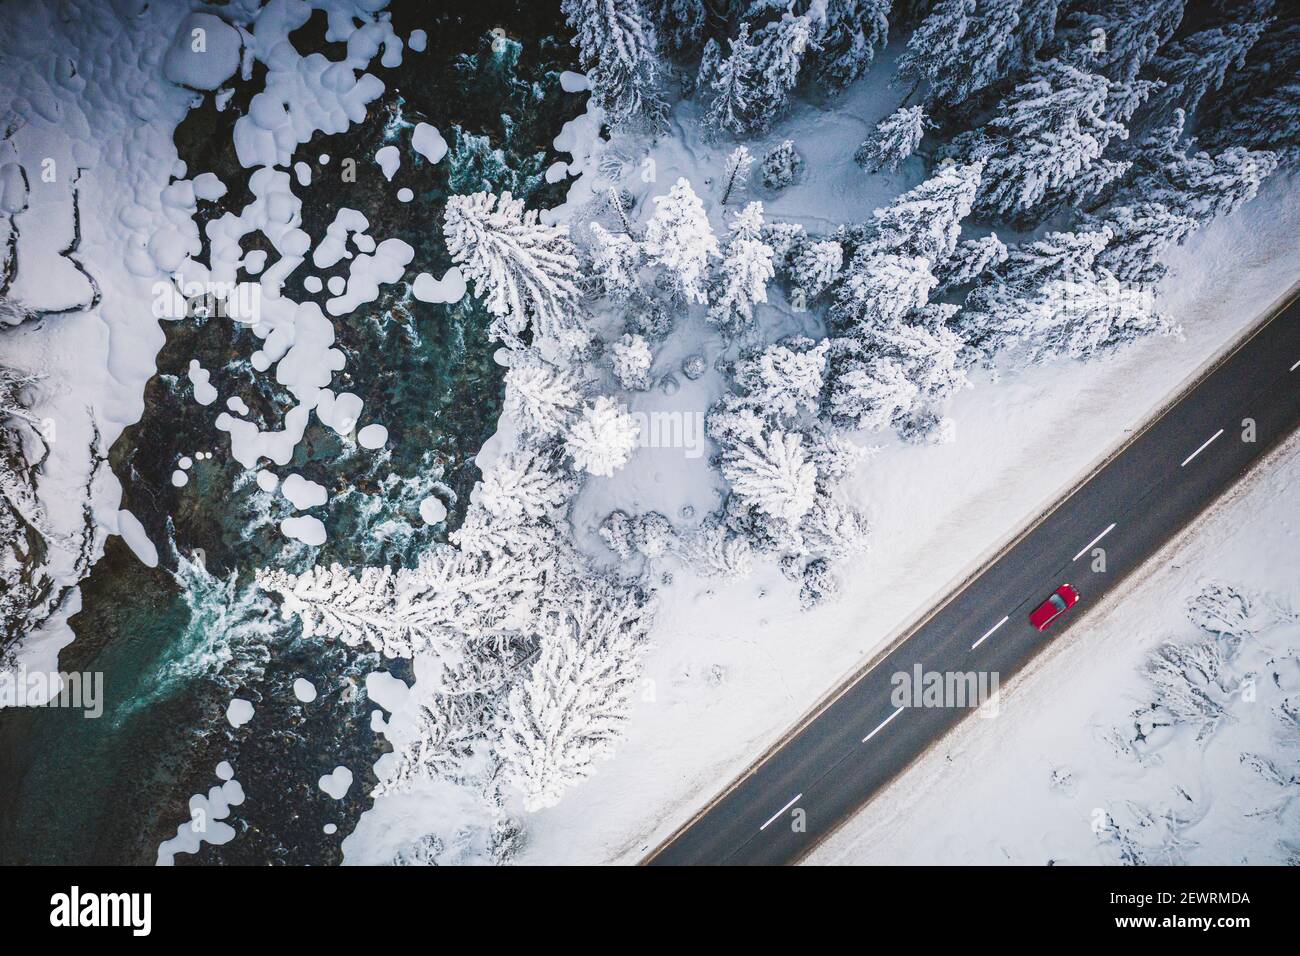 Car traveling on the snowy mountain road on side of frozen river and woods, aerial view, Switzerland, Europe Stock Photo